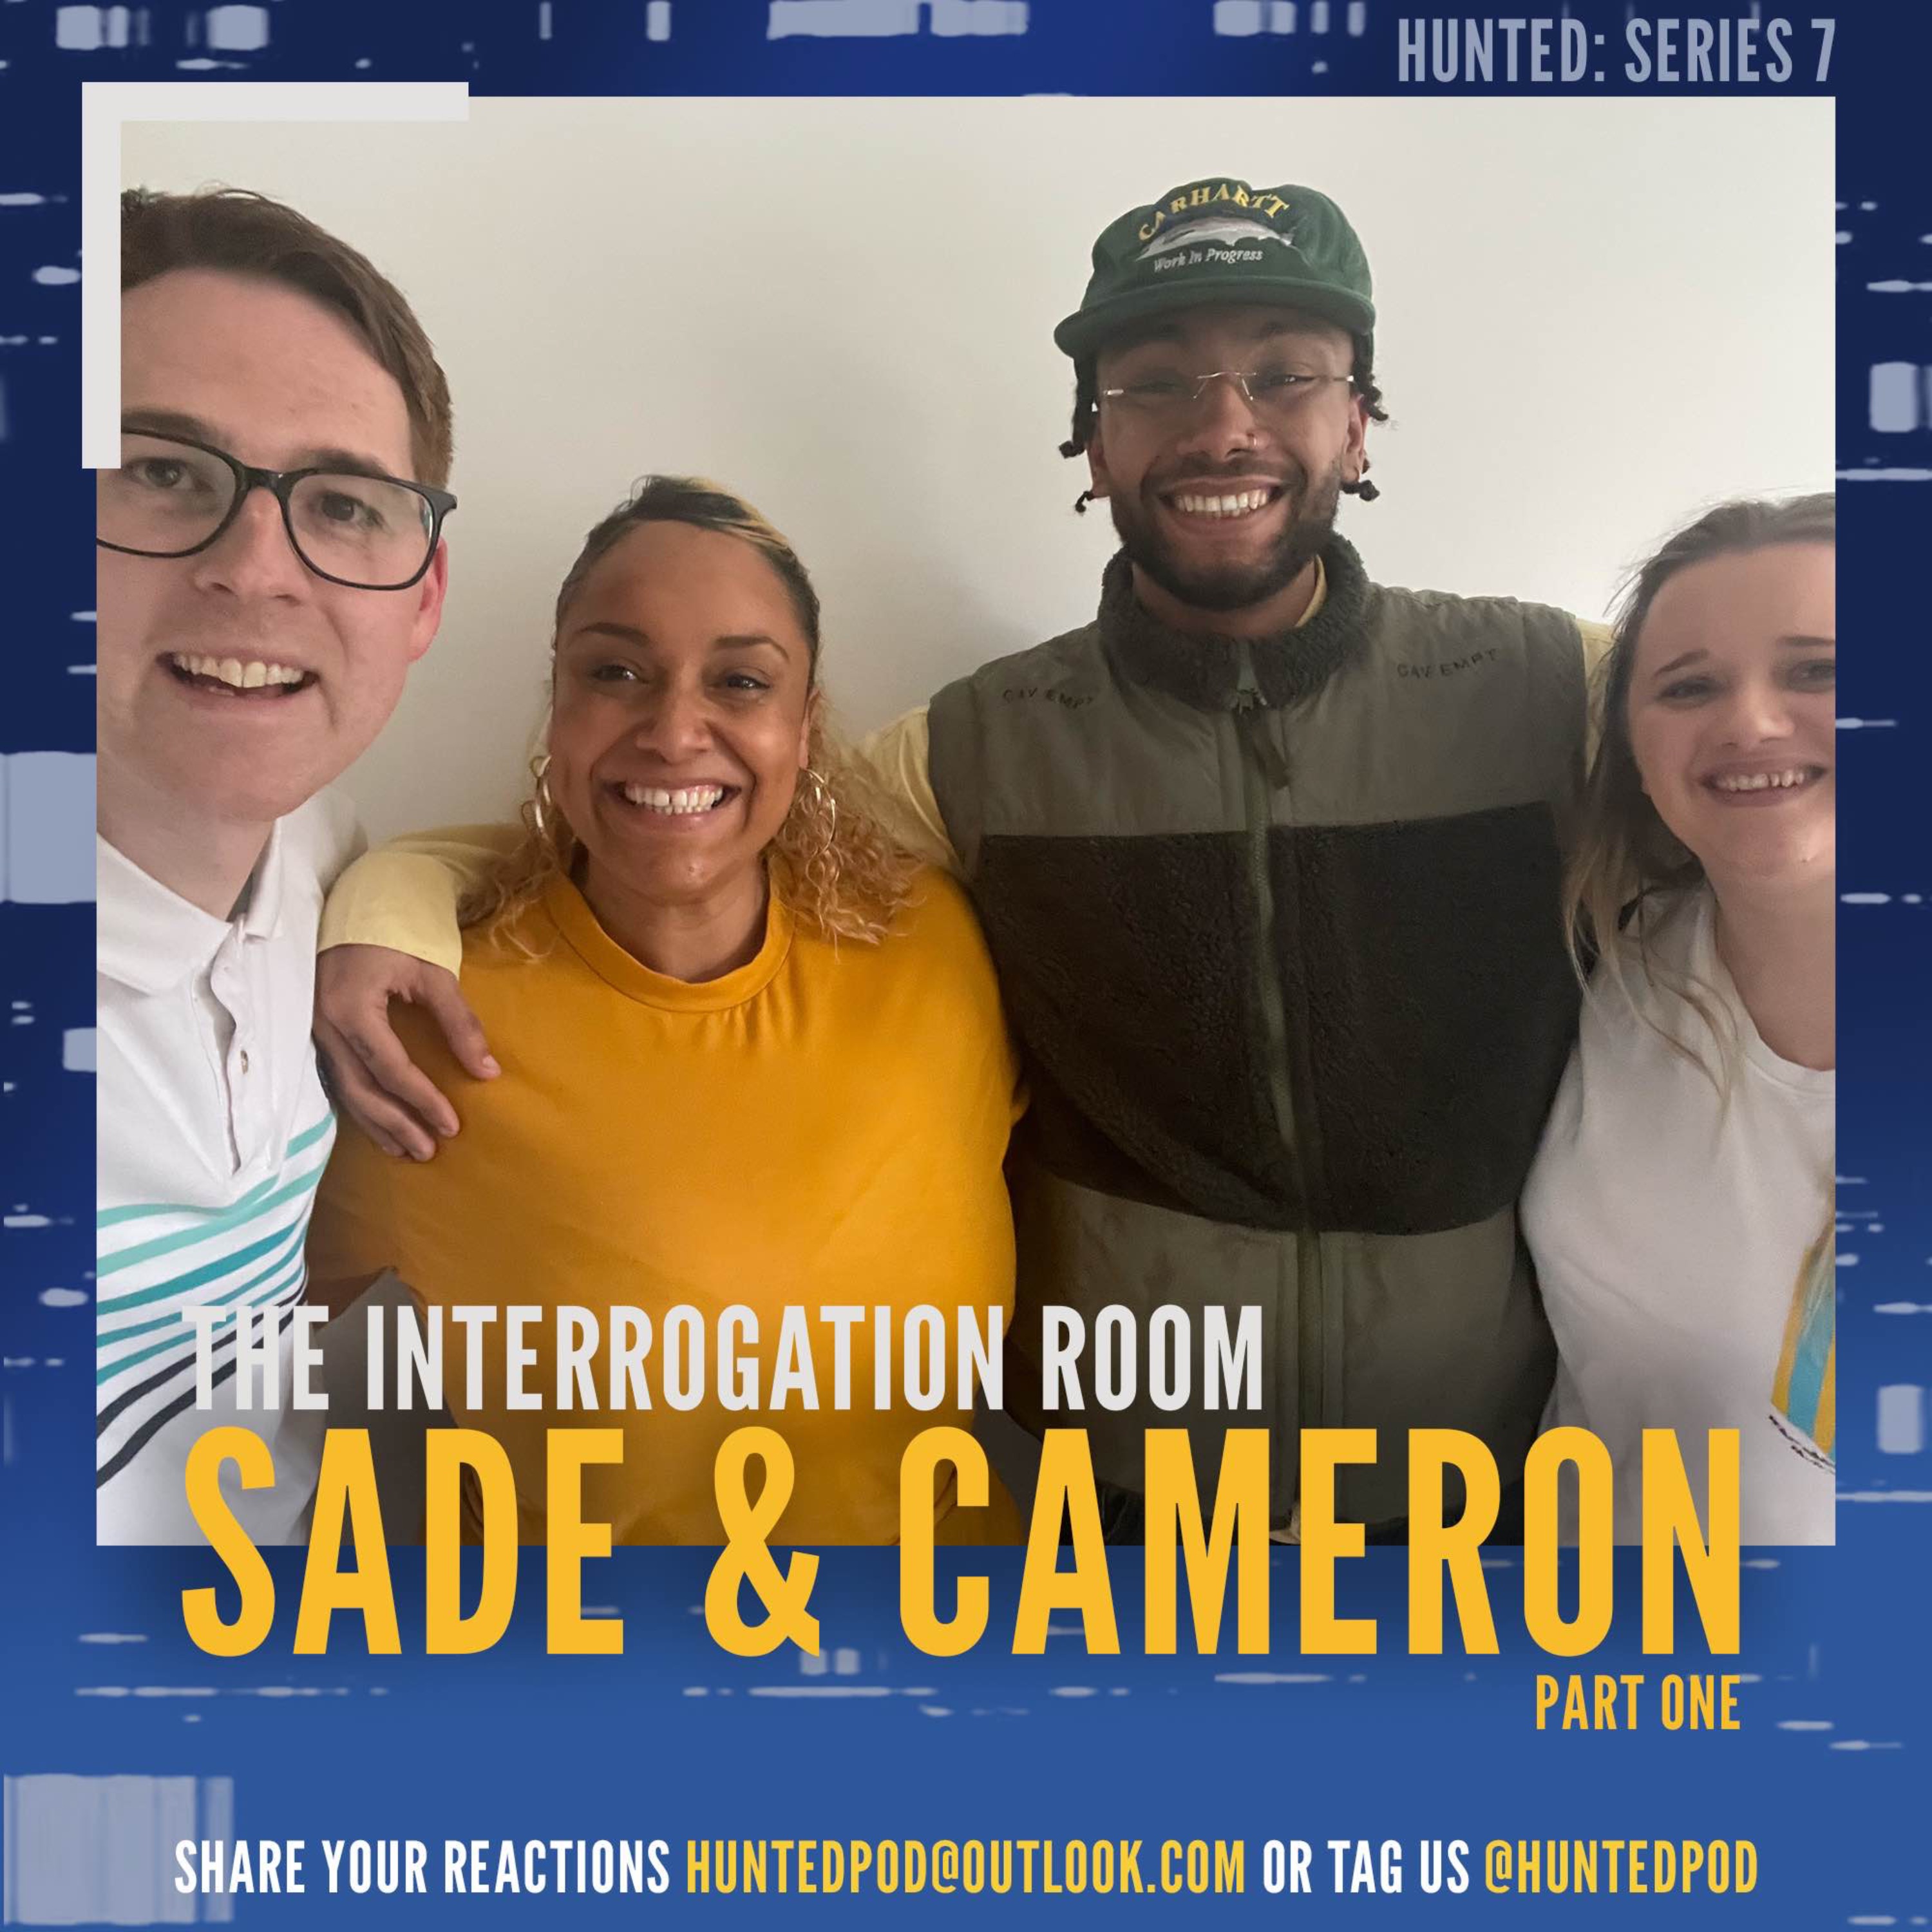 cover art for The Interrogation Room - Sade & Cameron [Part One] | Hunted, Series 7